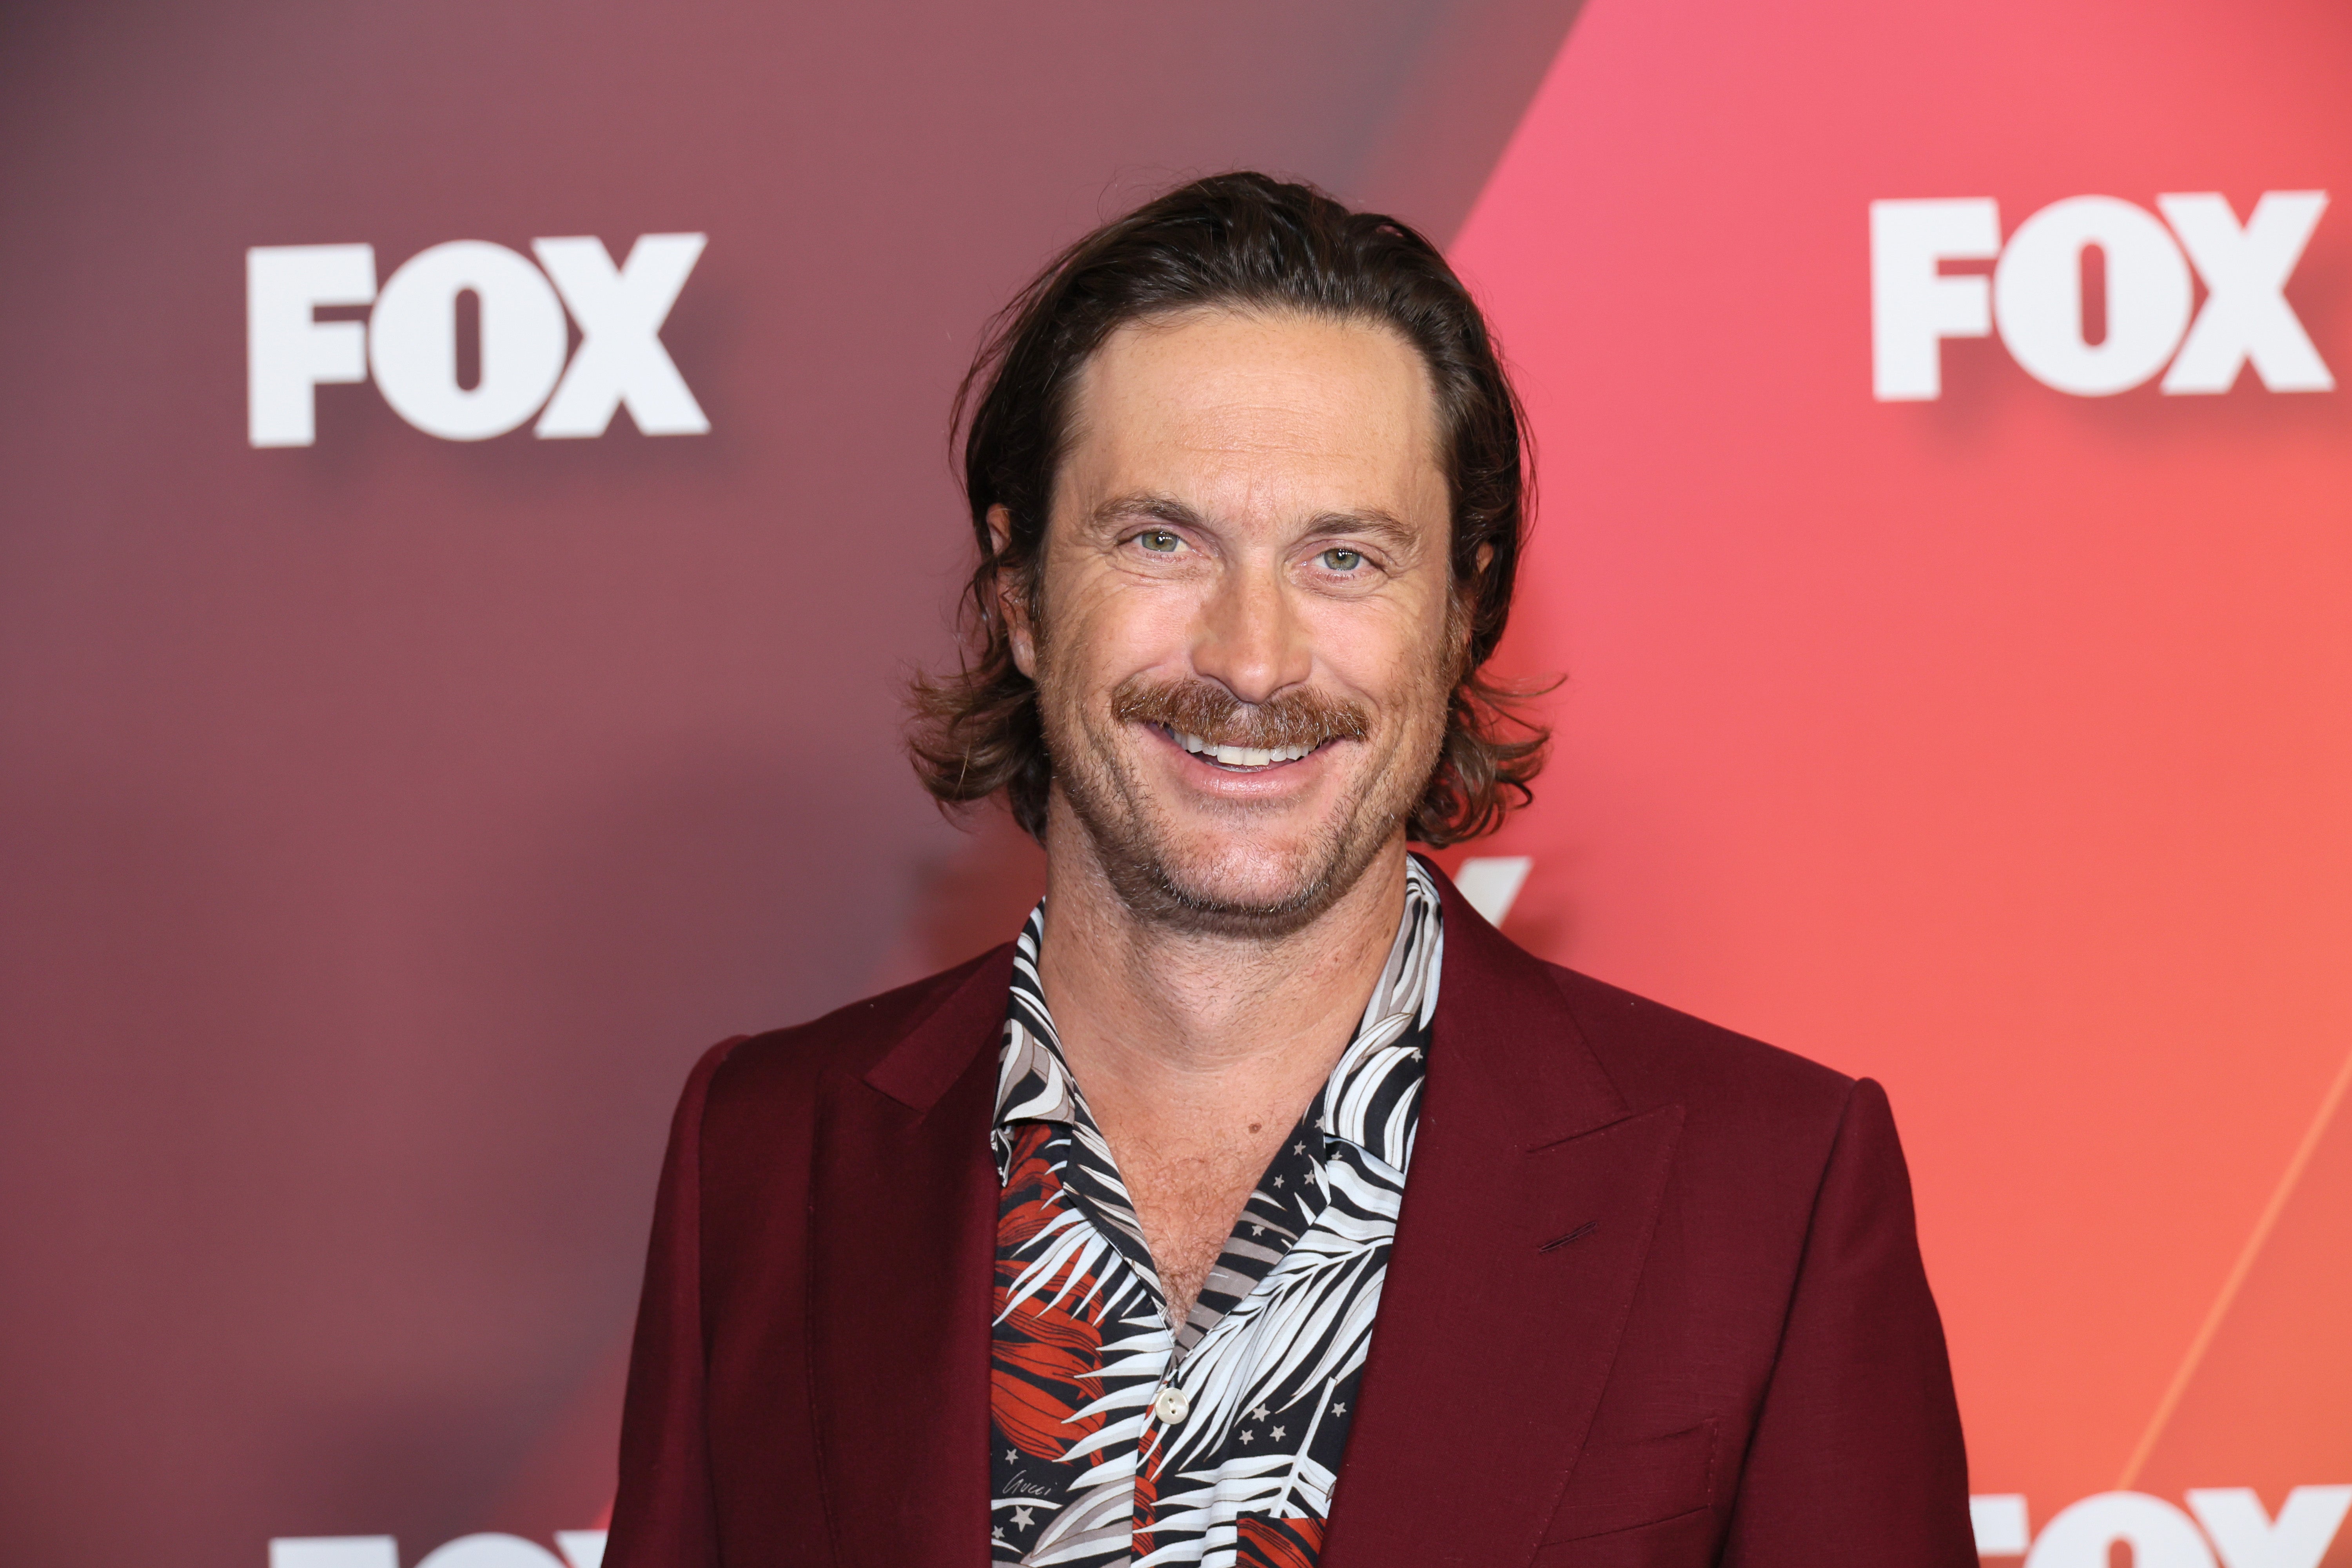 Oliver Hudson said he hadn’t been faithful to his wife